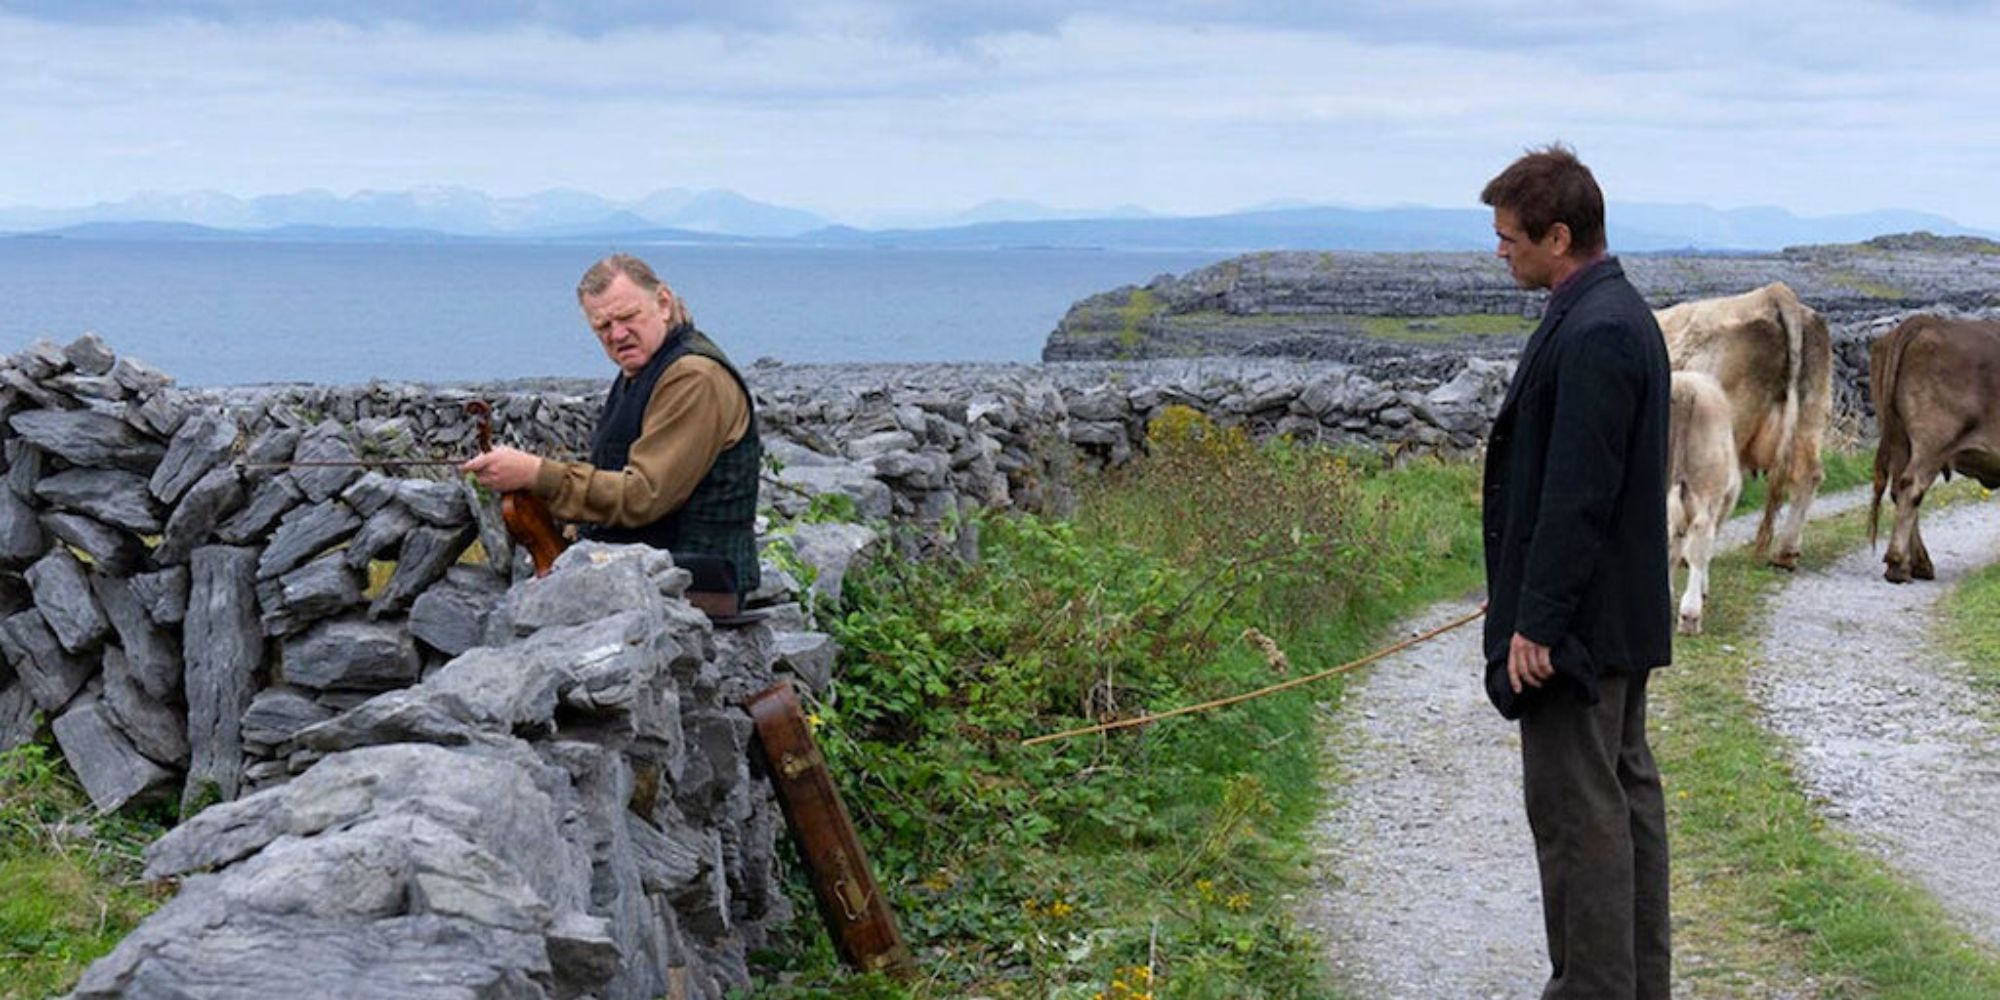 Brendan Gleeson and Colin Farrell in The Banshees of Inisherin